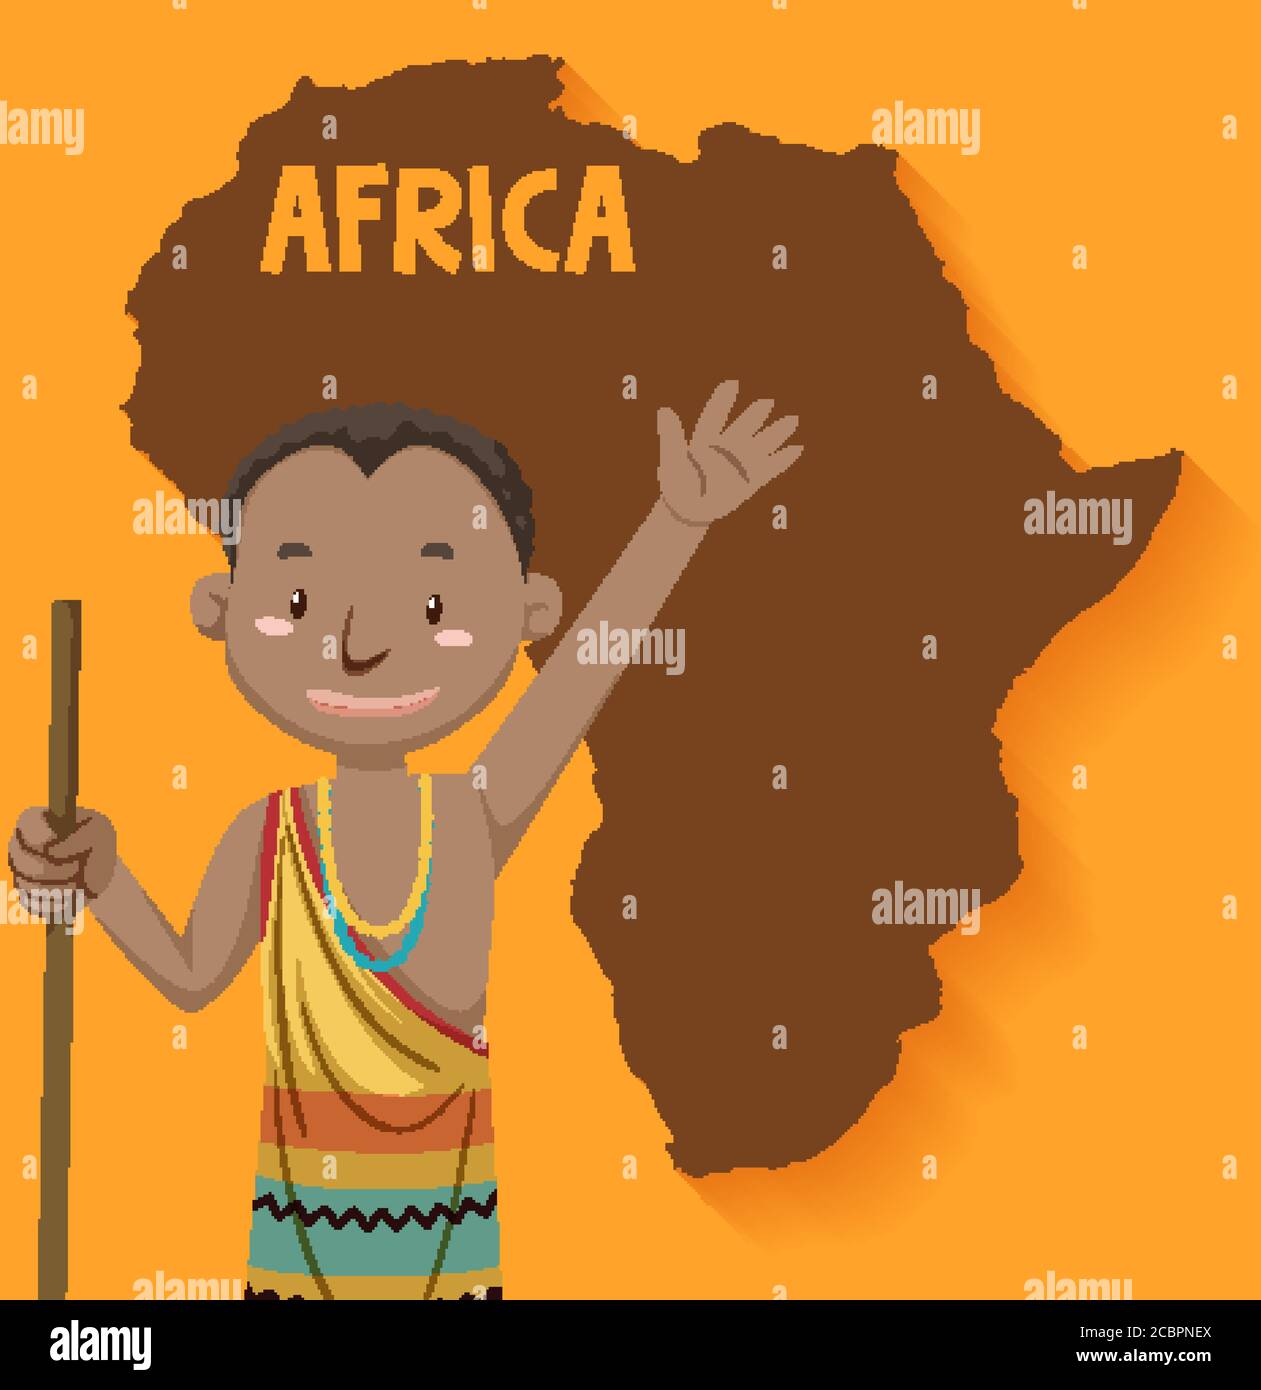 Native african tribes with map on the background illustration Stock Vector